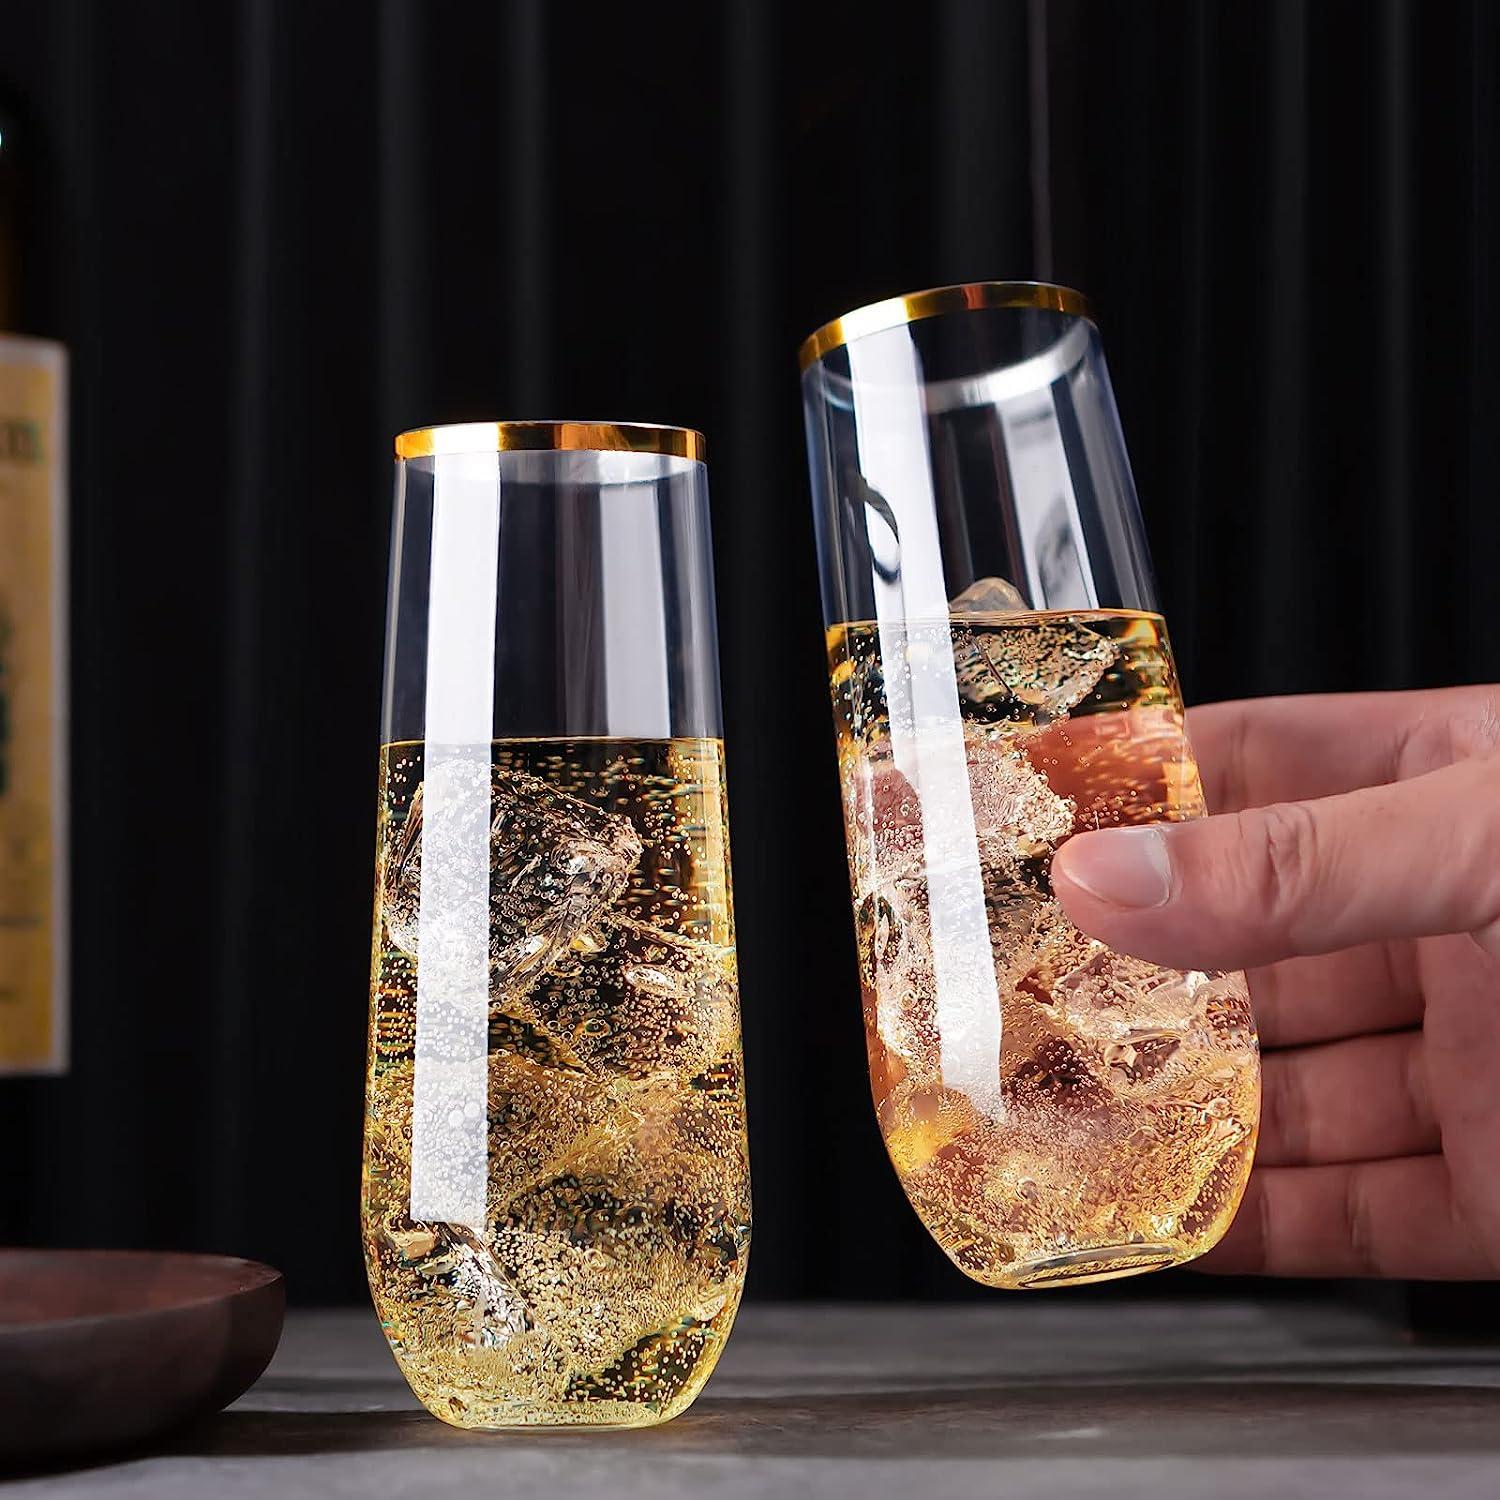 Wholesale Stemless Champagne Flute 9oz - Wine-n-Gear